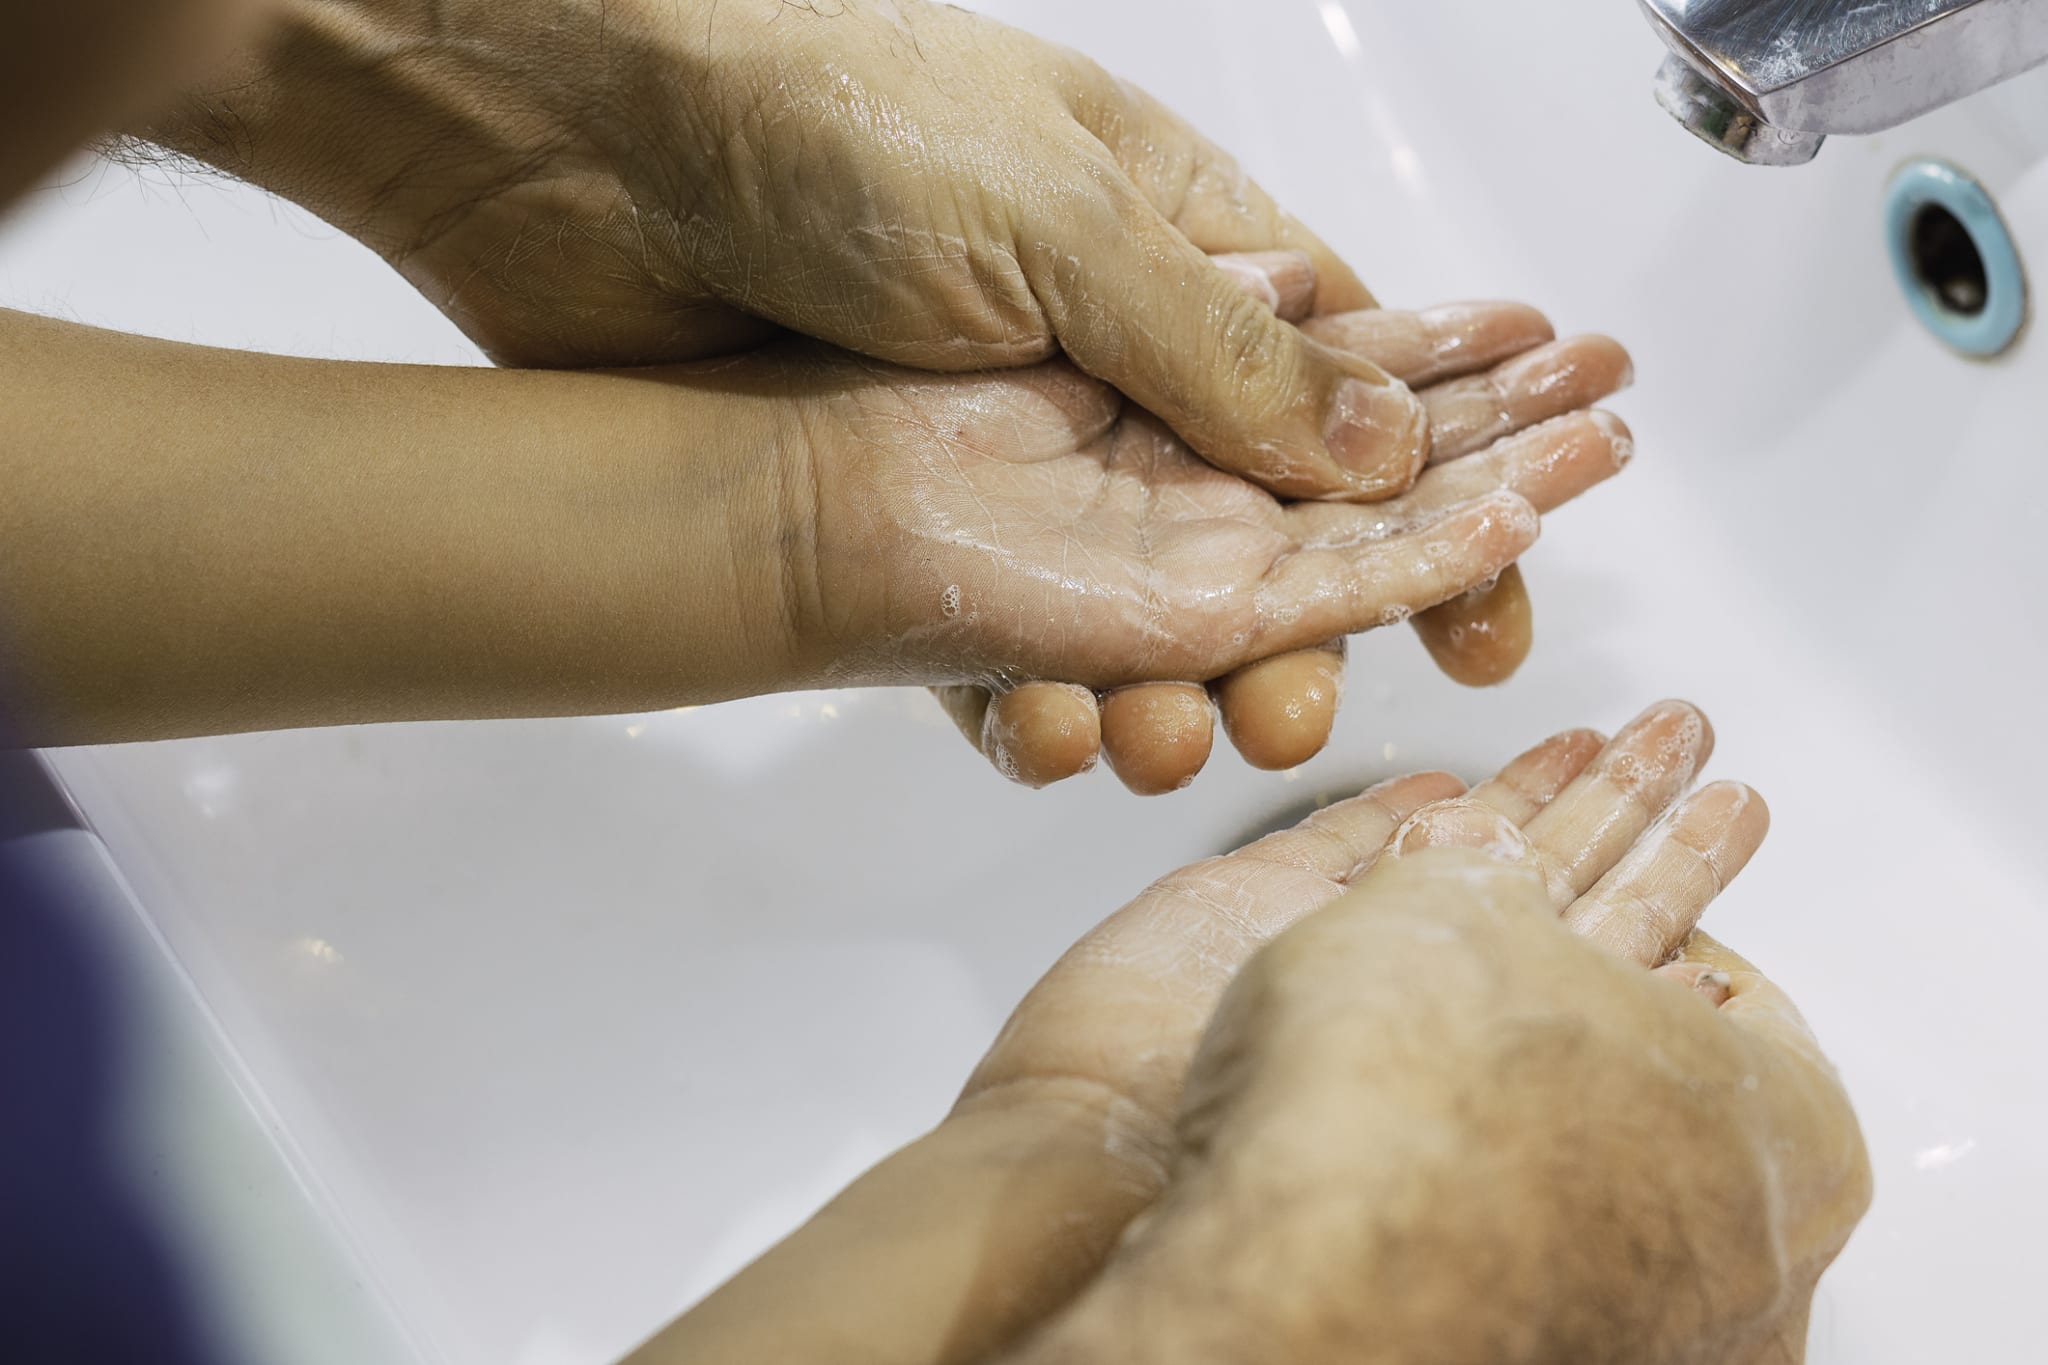 ad washing his little son's hands with soap and water stock photo